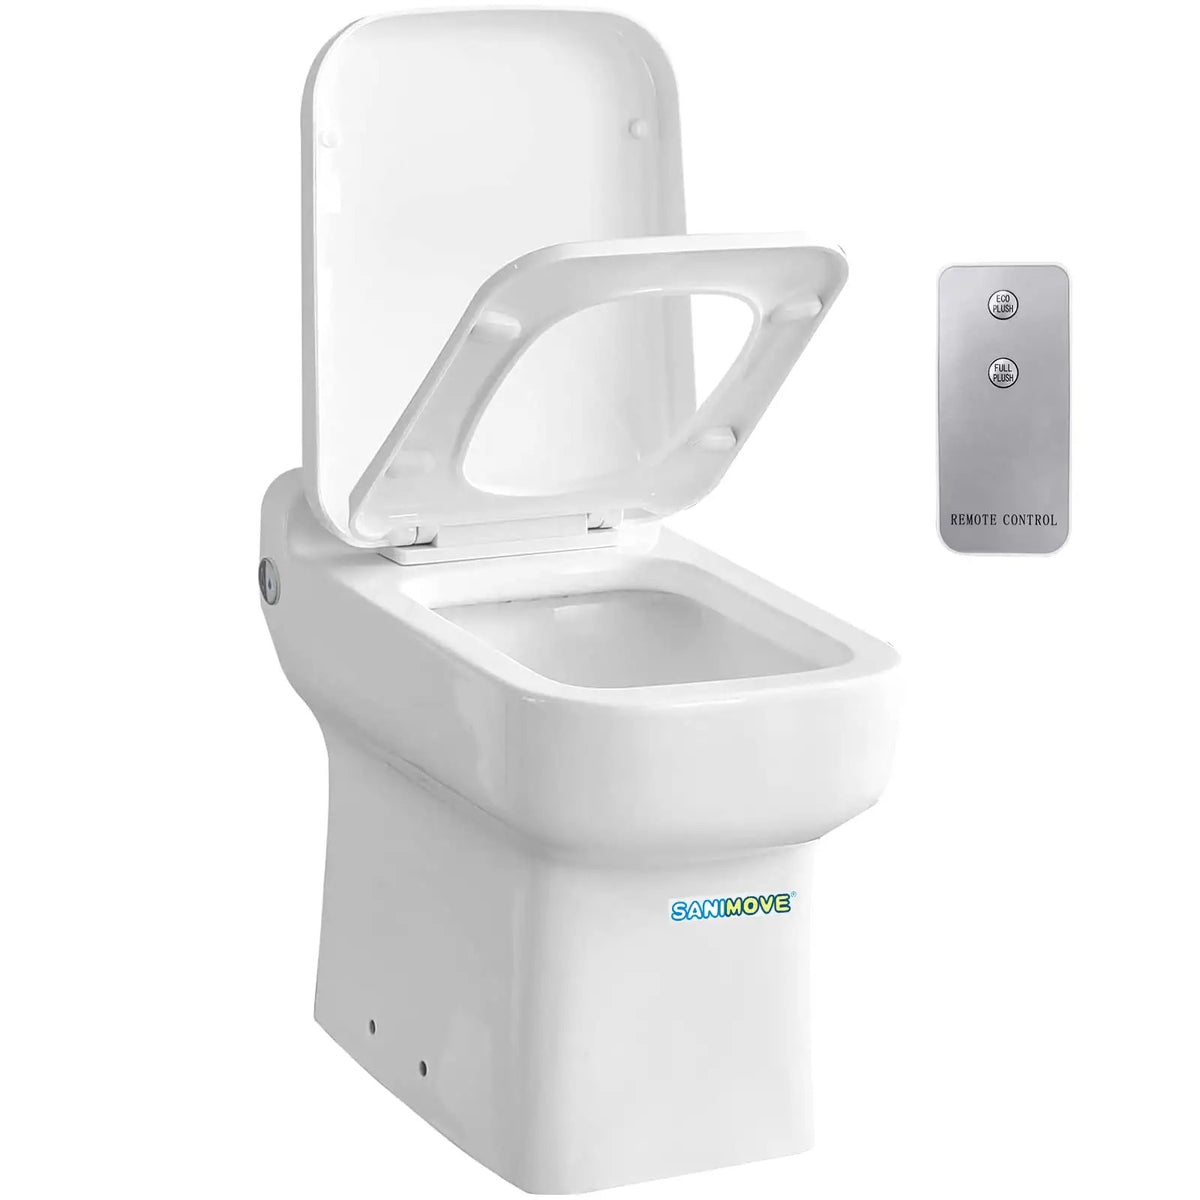 600W One Piece Macerating Toilet 4/5HP Remote Control Macerator